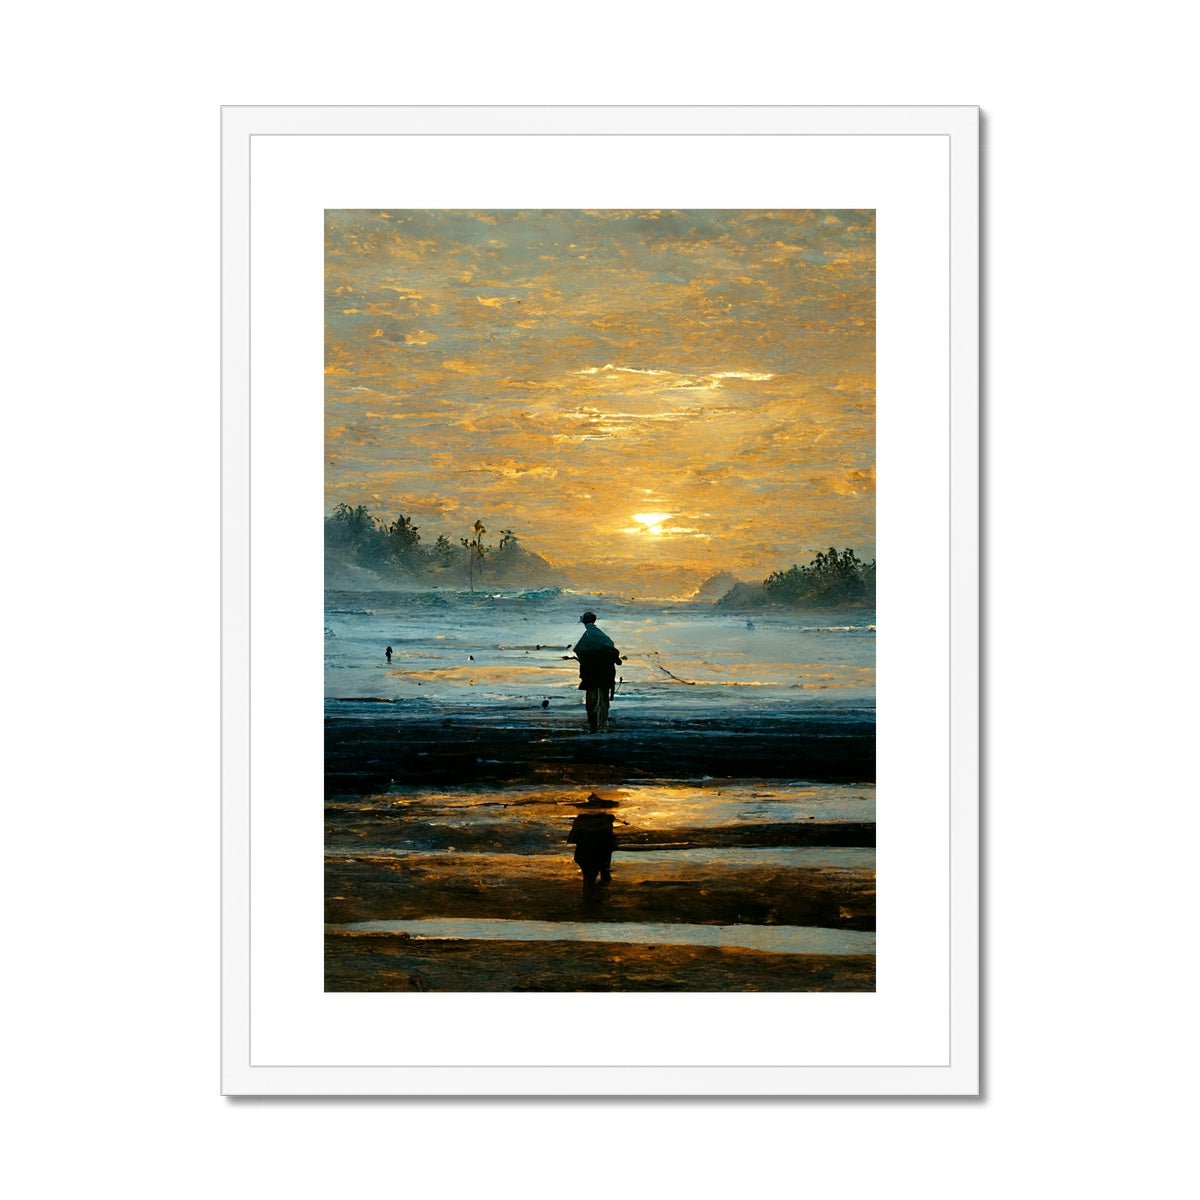 The Catch Framed & Mounted Print